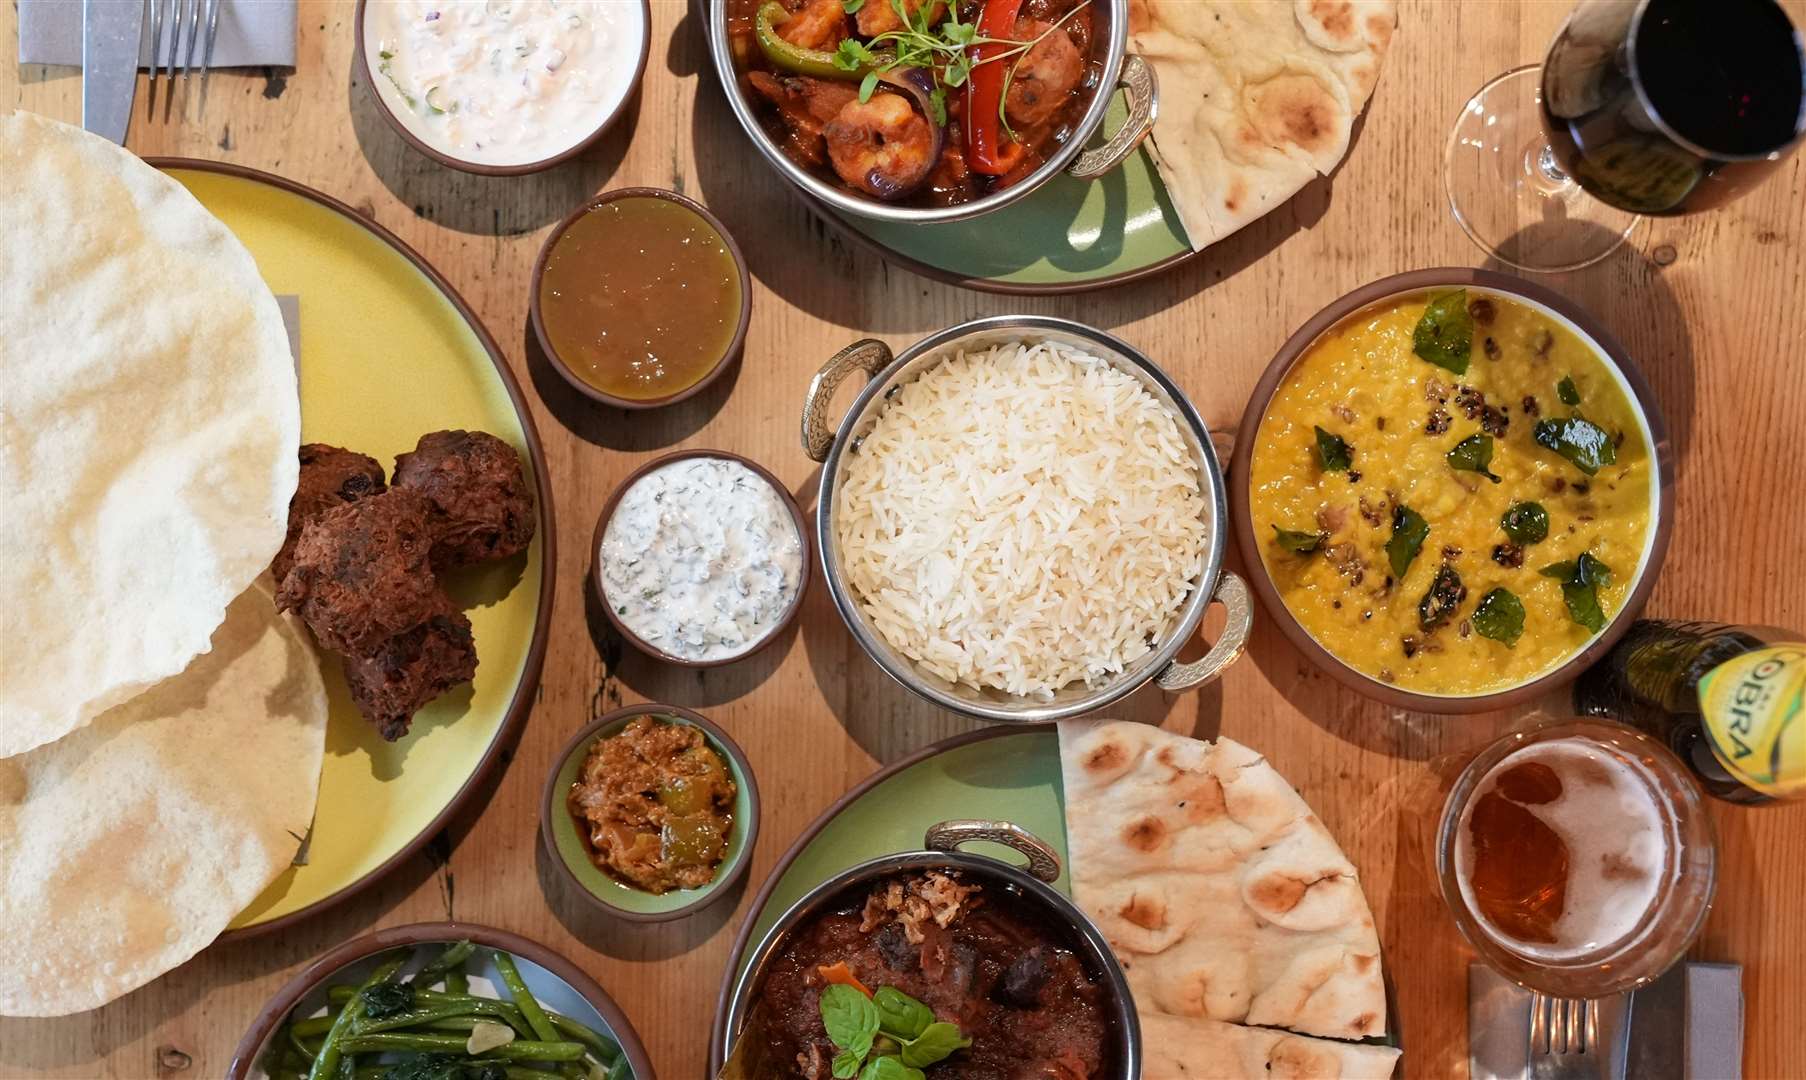 If you’re visiting on a Friday you can sample the new curry night menu at the Bear Lodge restaurant. Picture: Aspinall Foundation